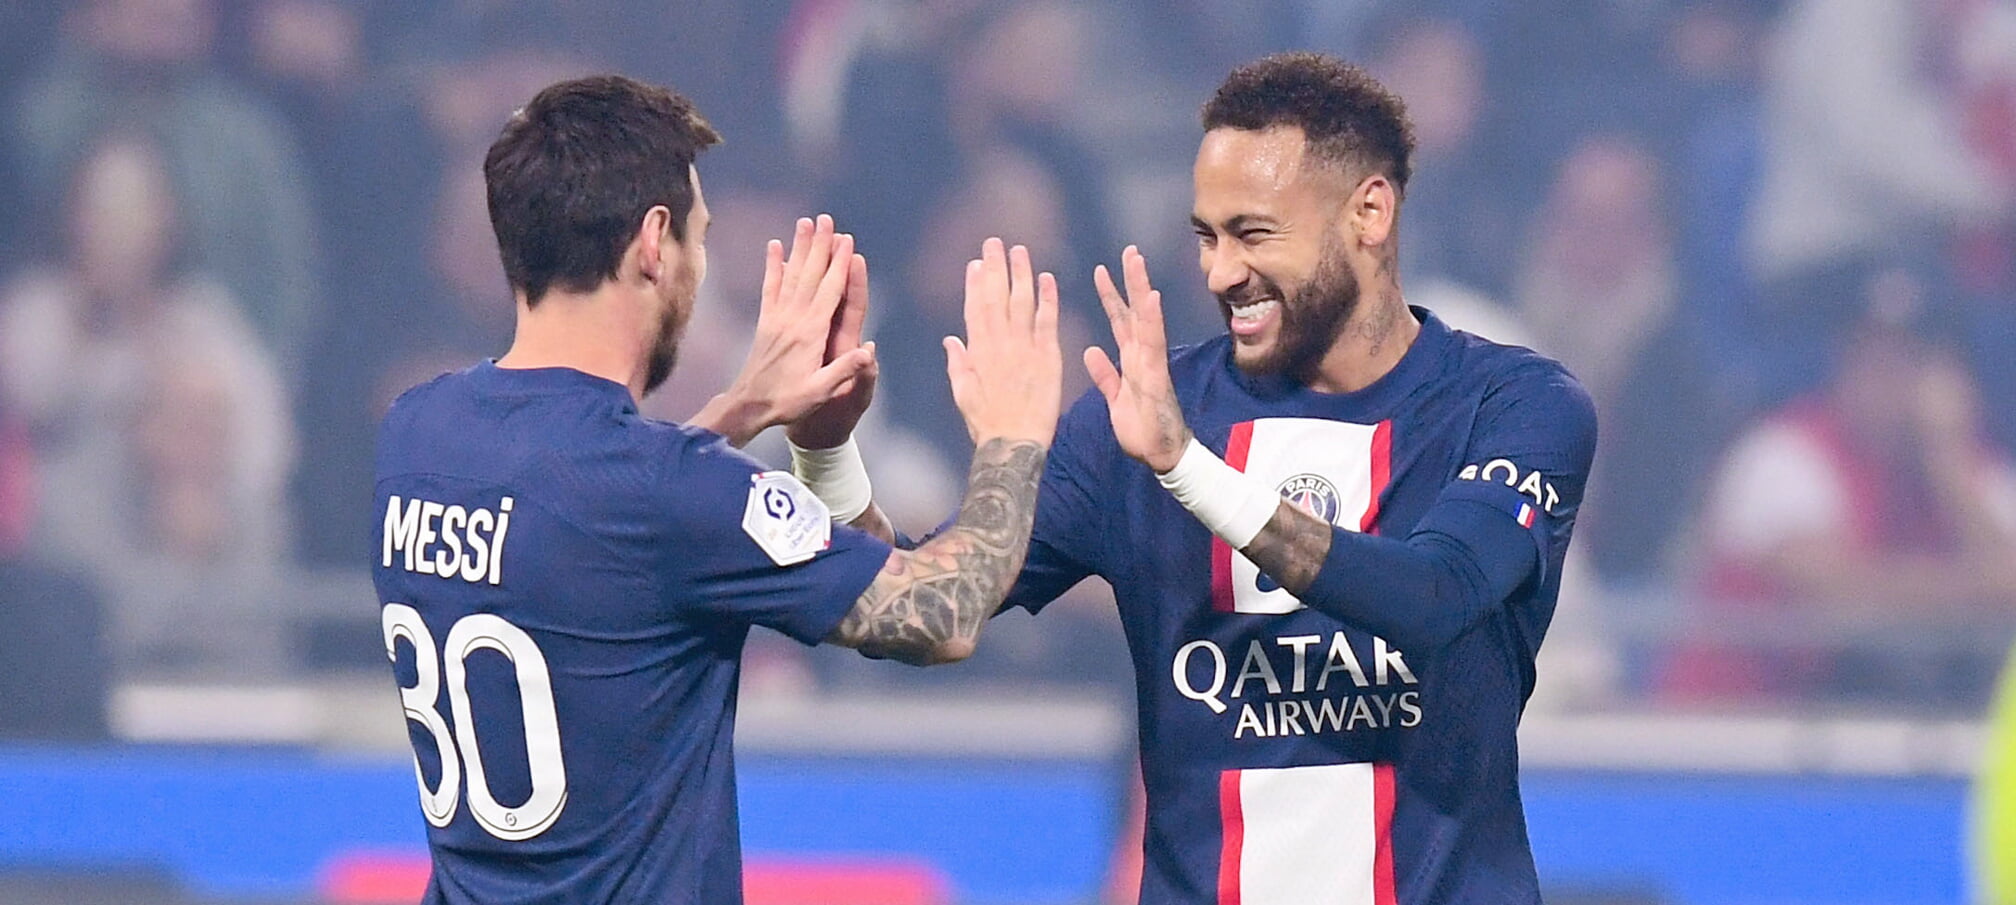 PSG-Marseille preview: Messi and Neymar back for Classique?